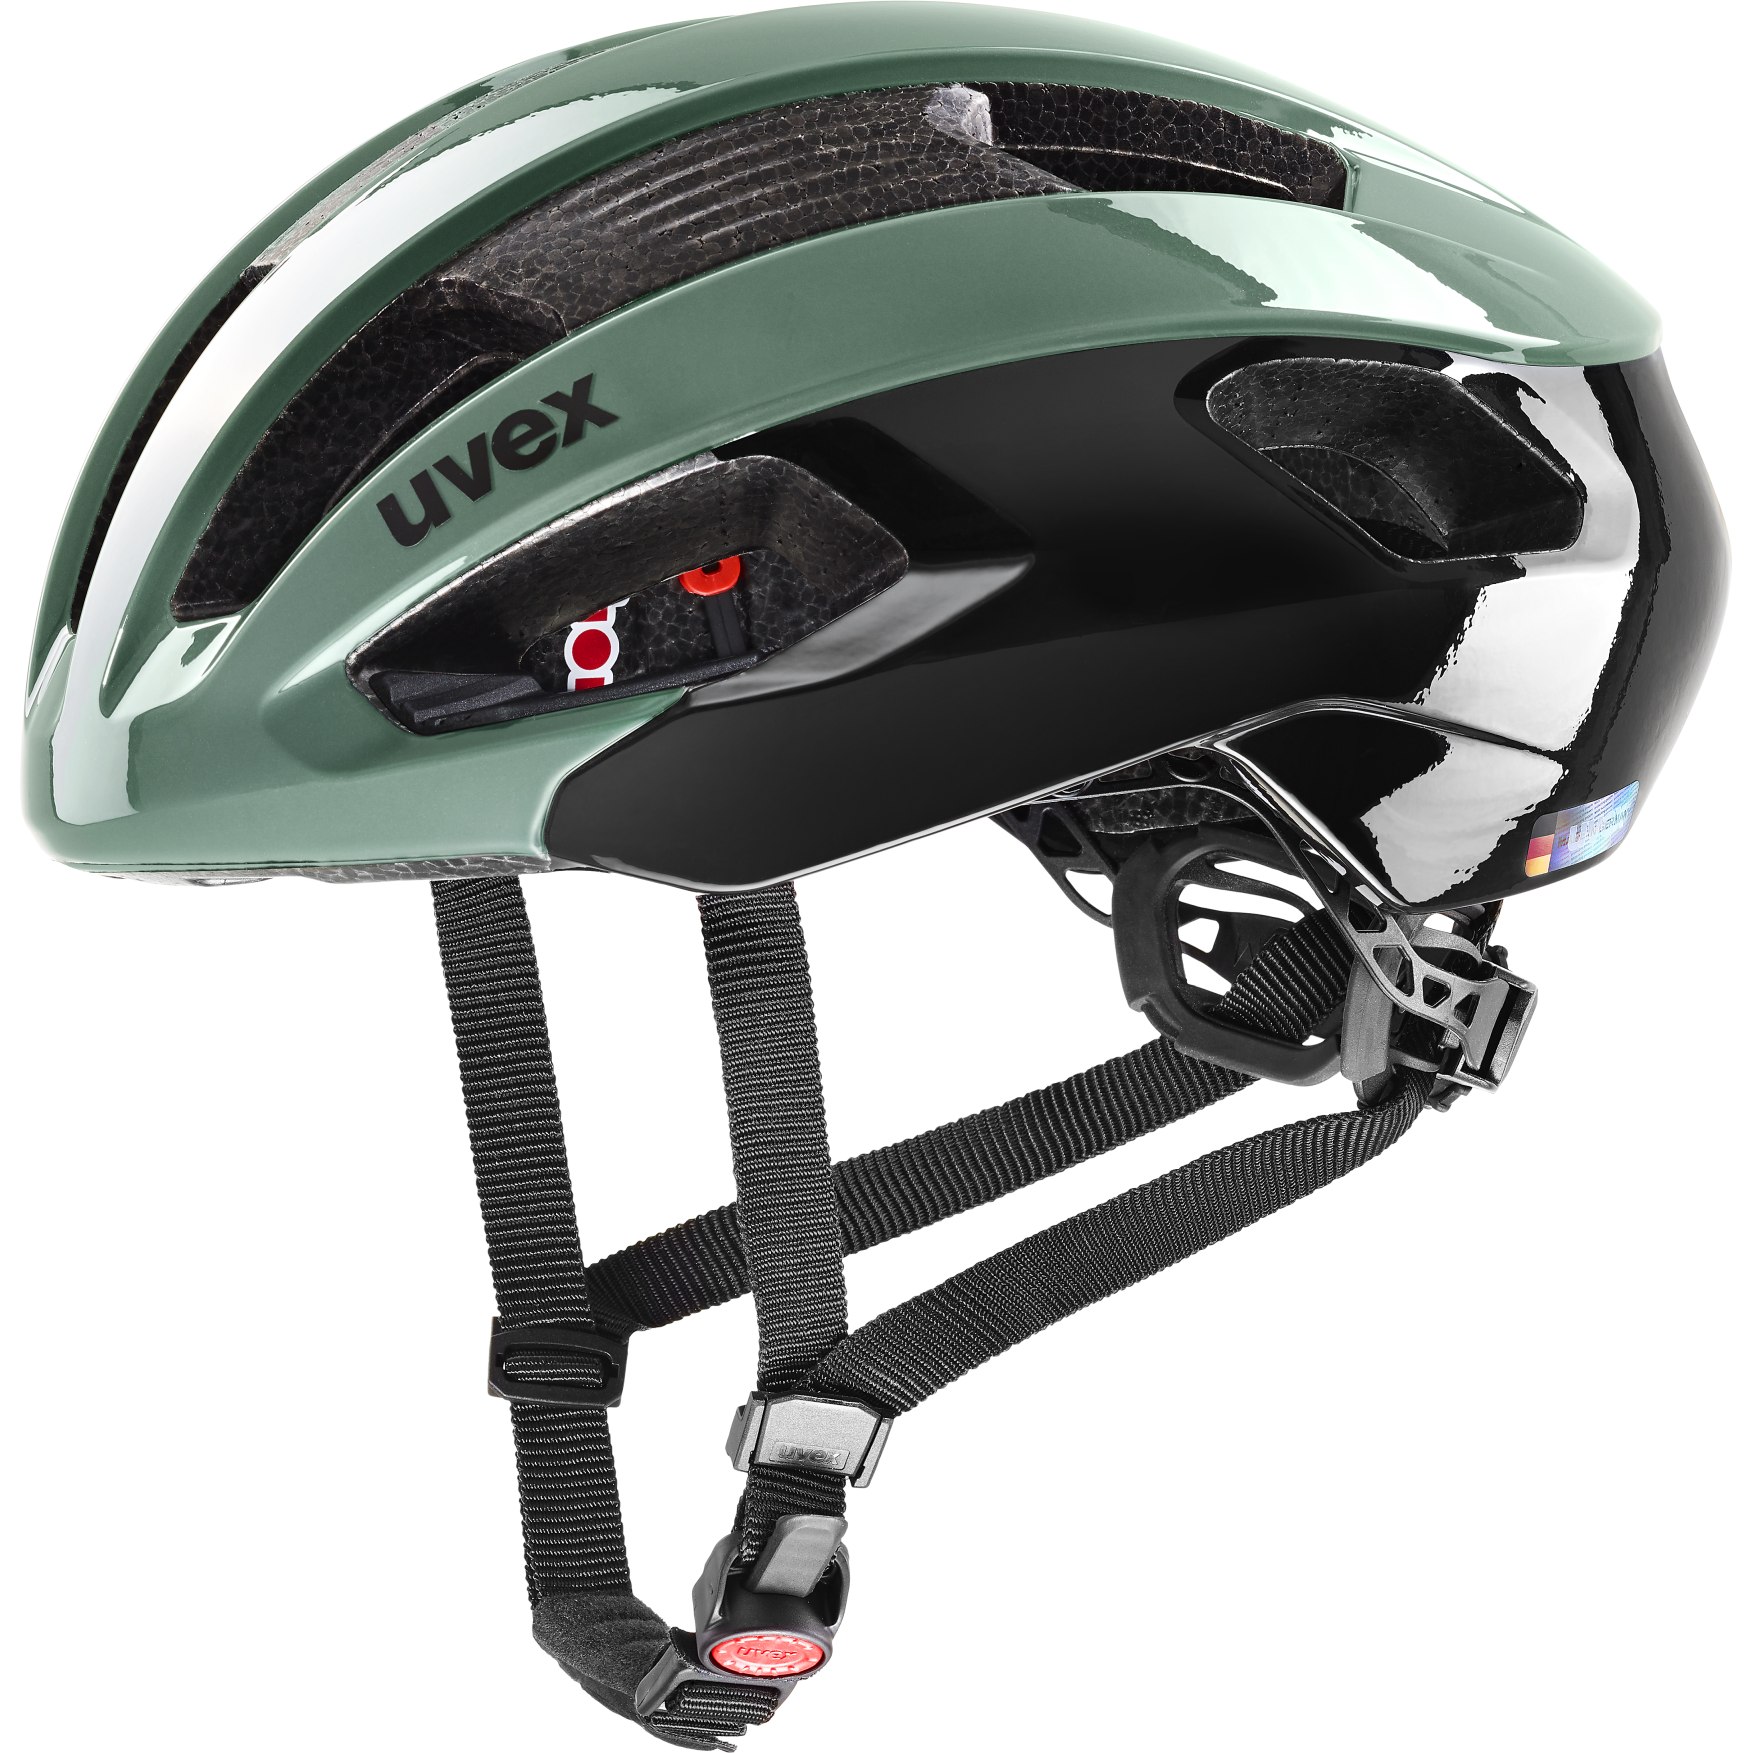 Picture of Uvex rise Helmet - moss green-black